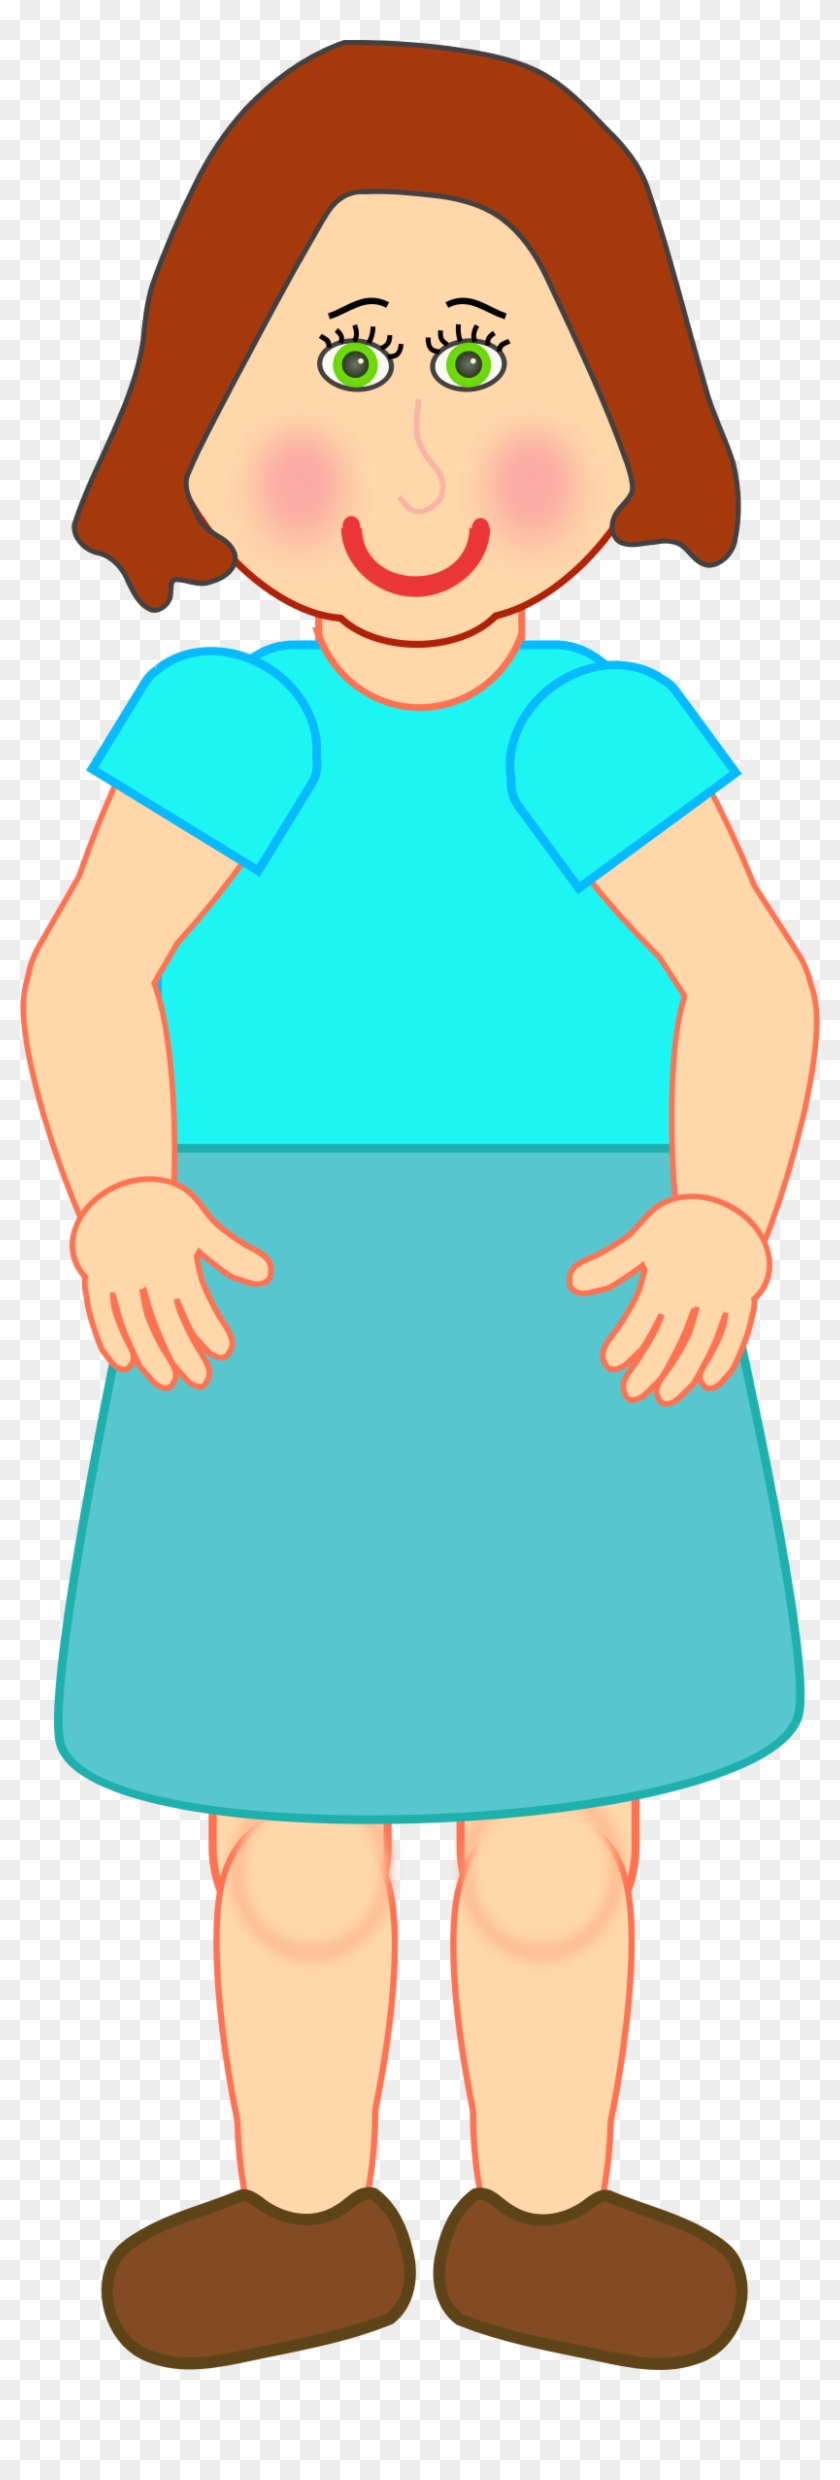 Clipart Woman Standing - Clipart Of A Woman Standing #515799